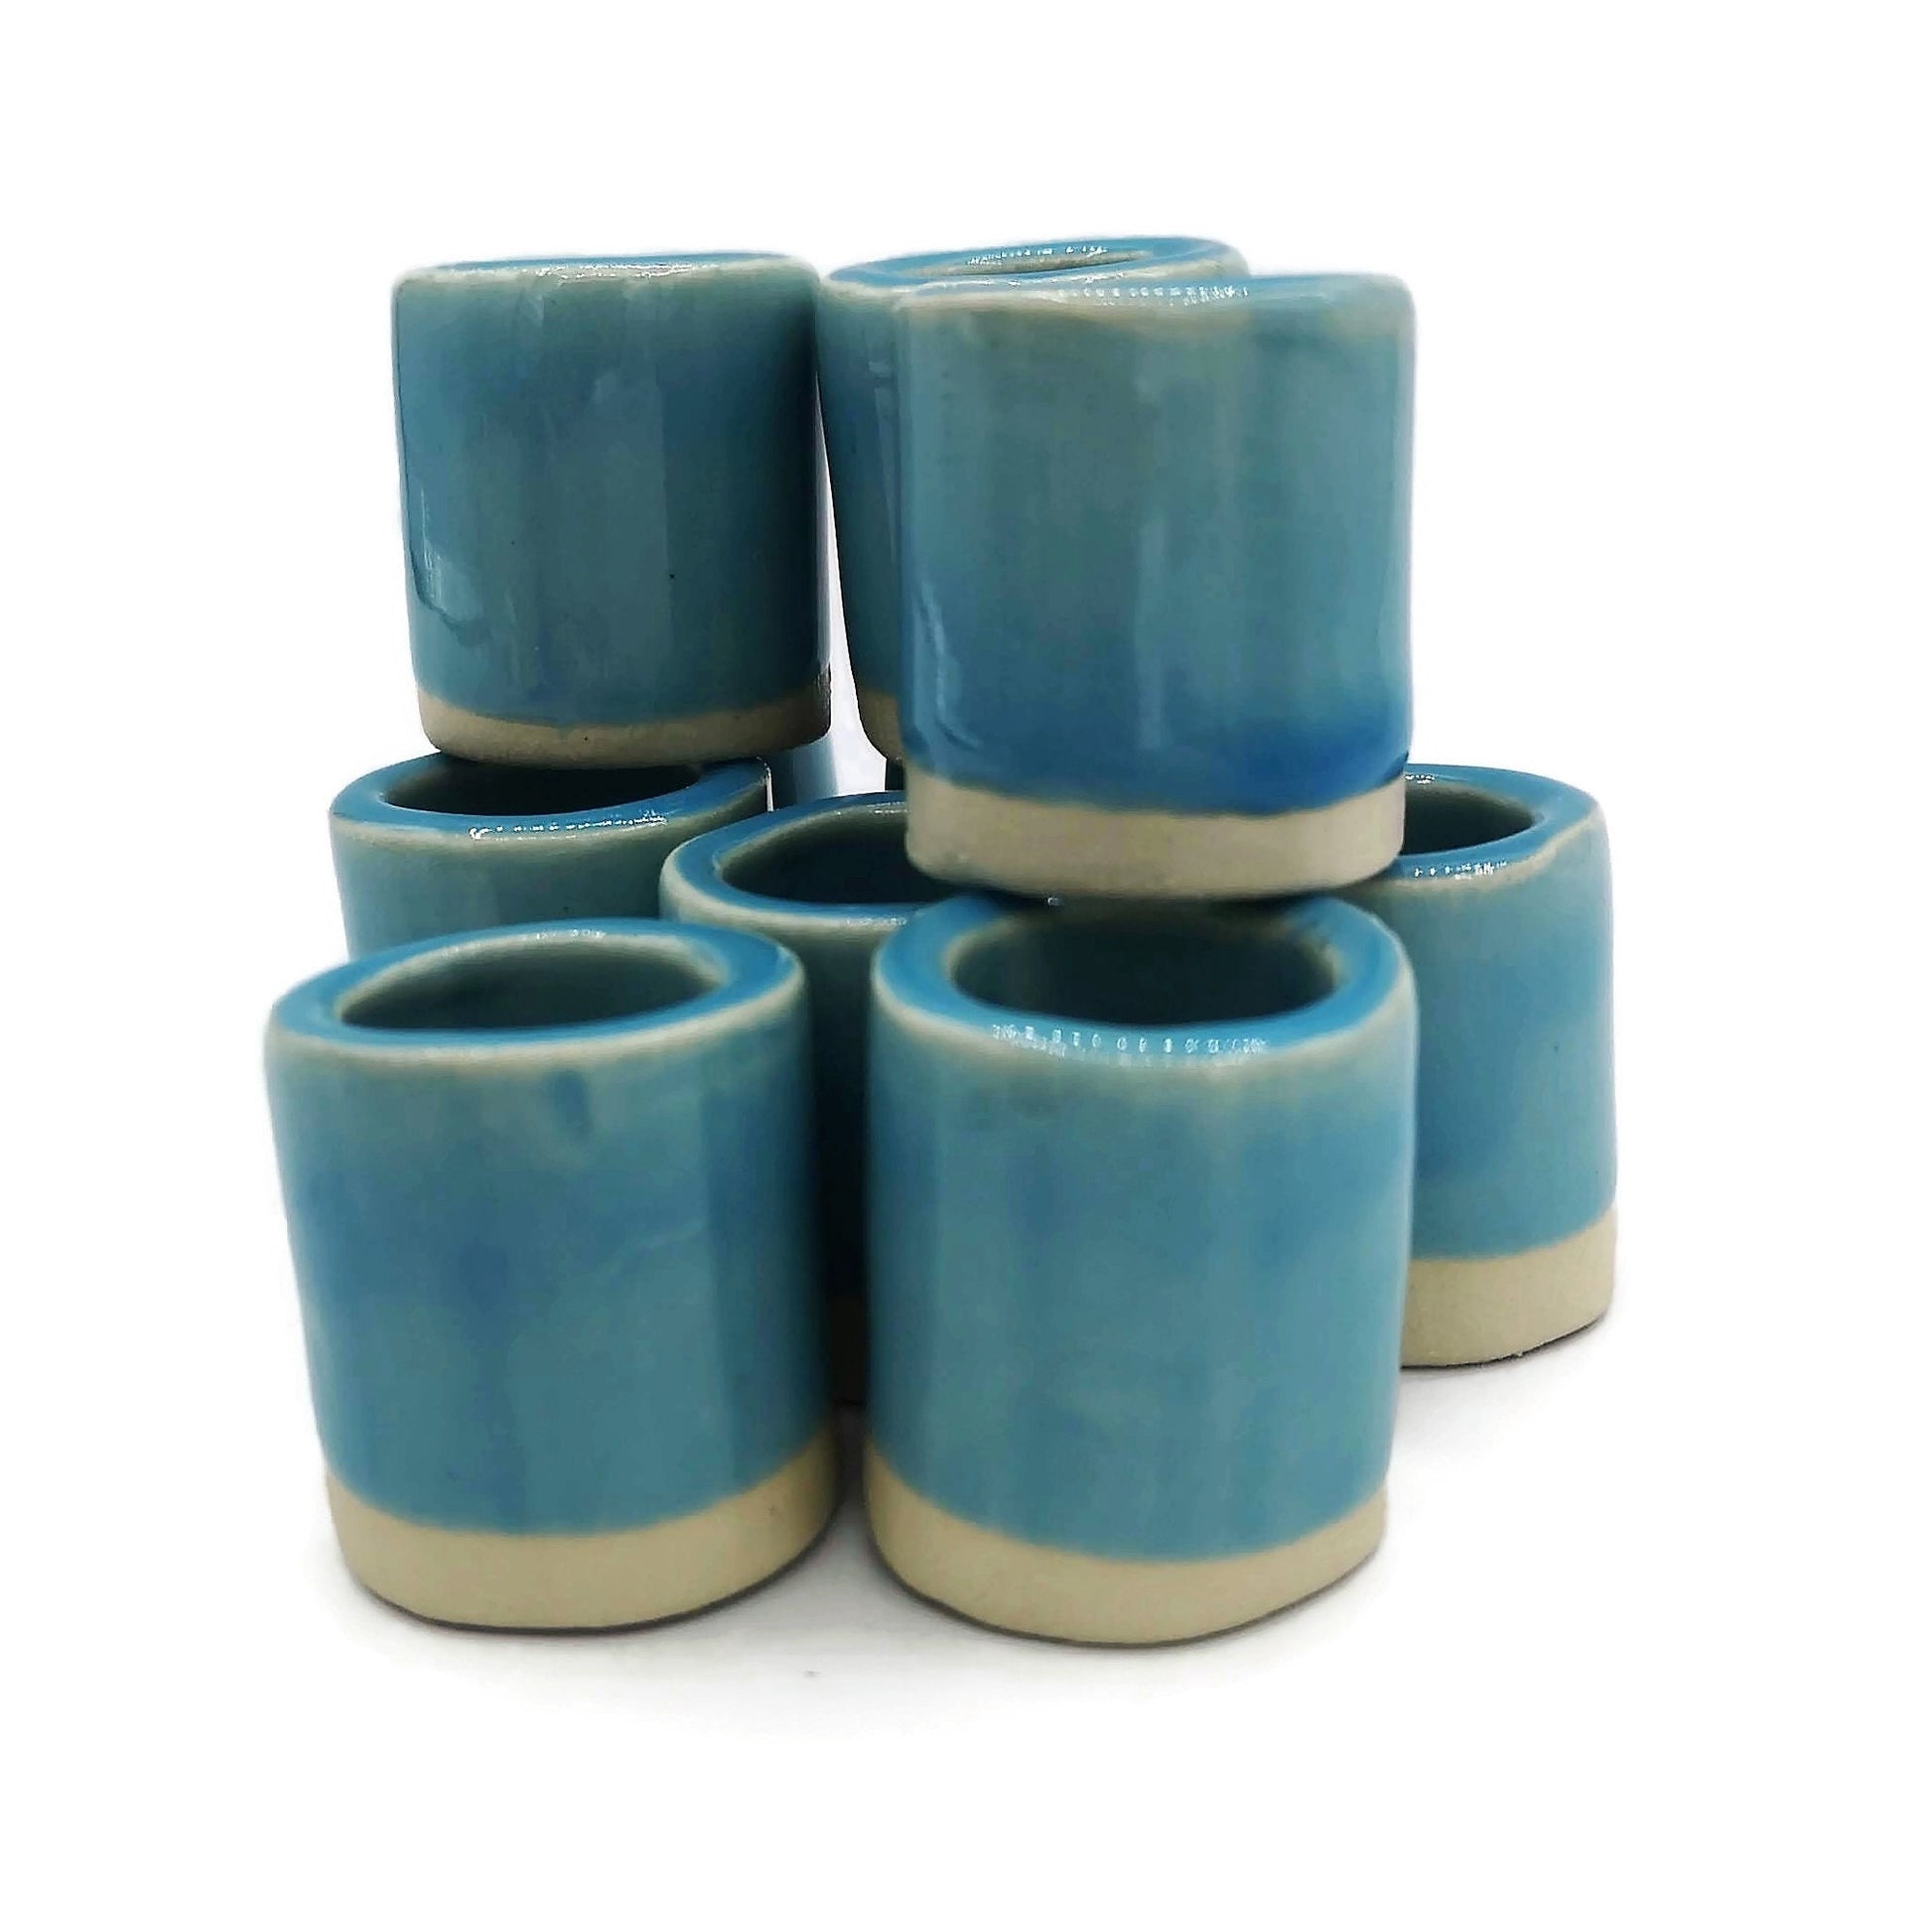 LARGE TUBE BEADS, 1 Pc Unique Clay Beads For Macrame, 35mm Long Ceramic Beads, Decorative Craft Beads With Large Hole - Ceramica Ana Rafael